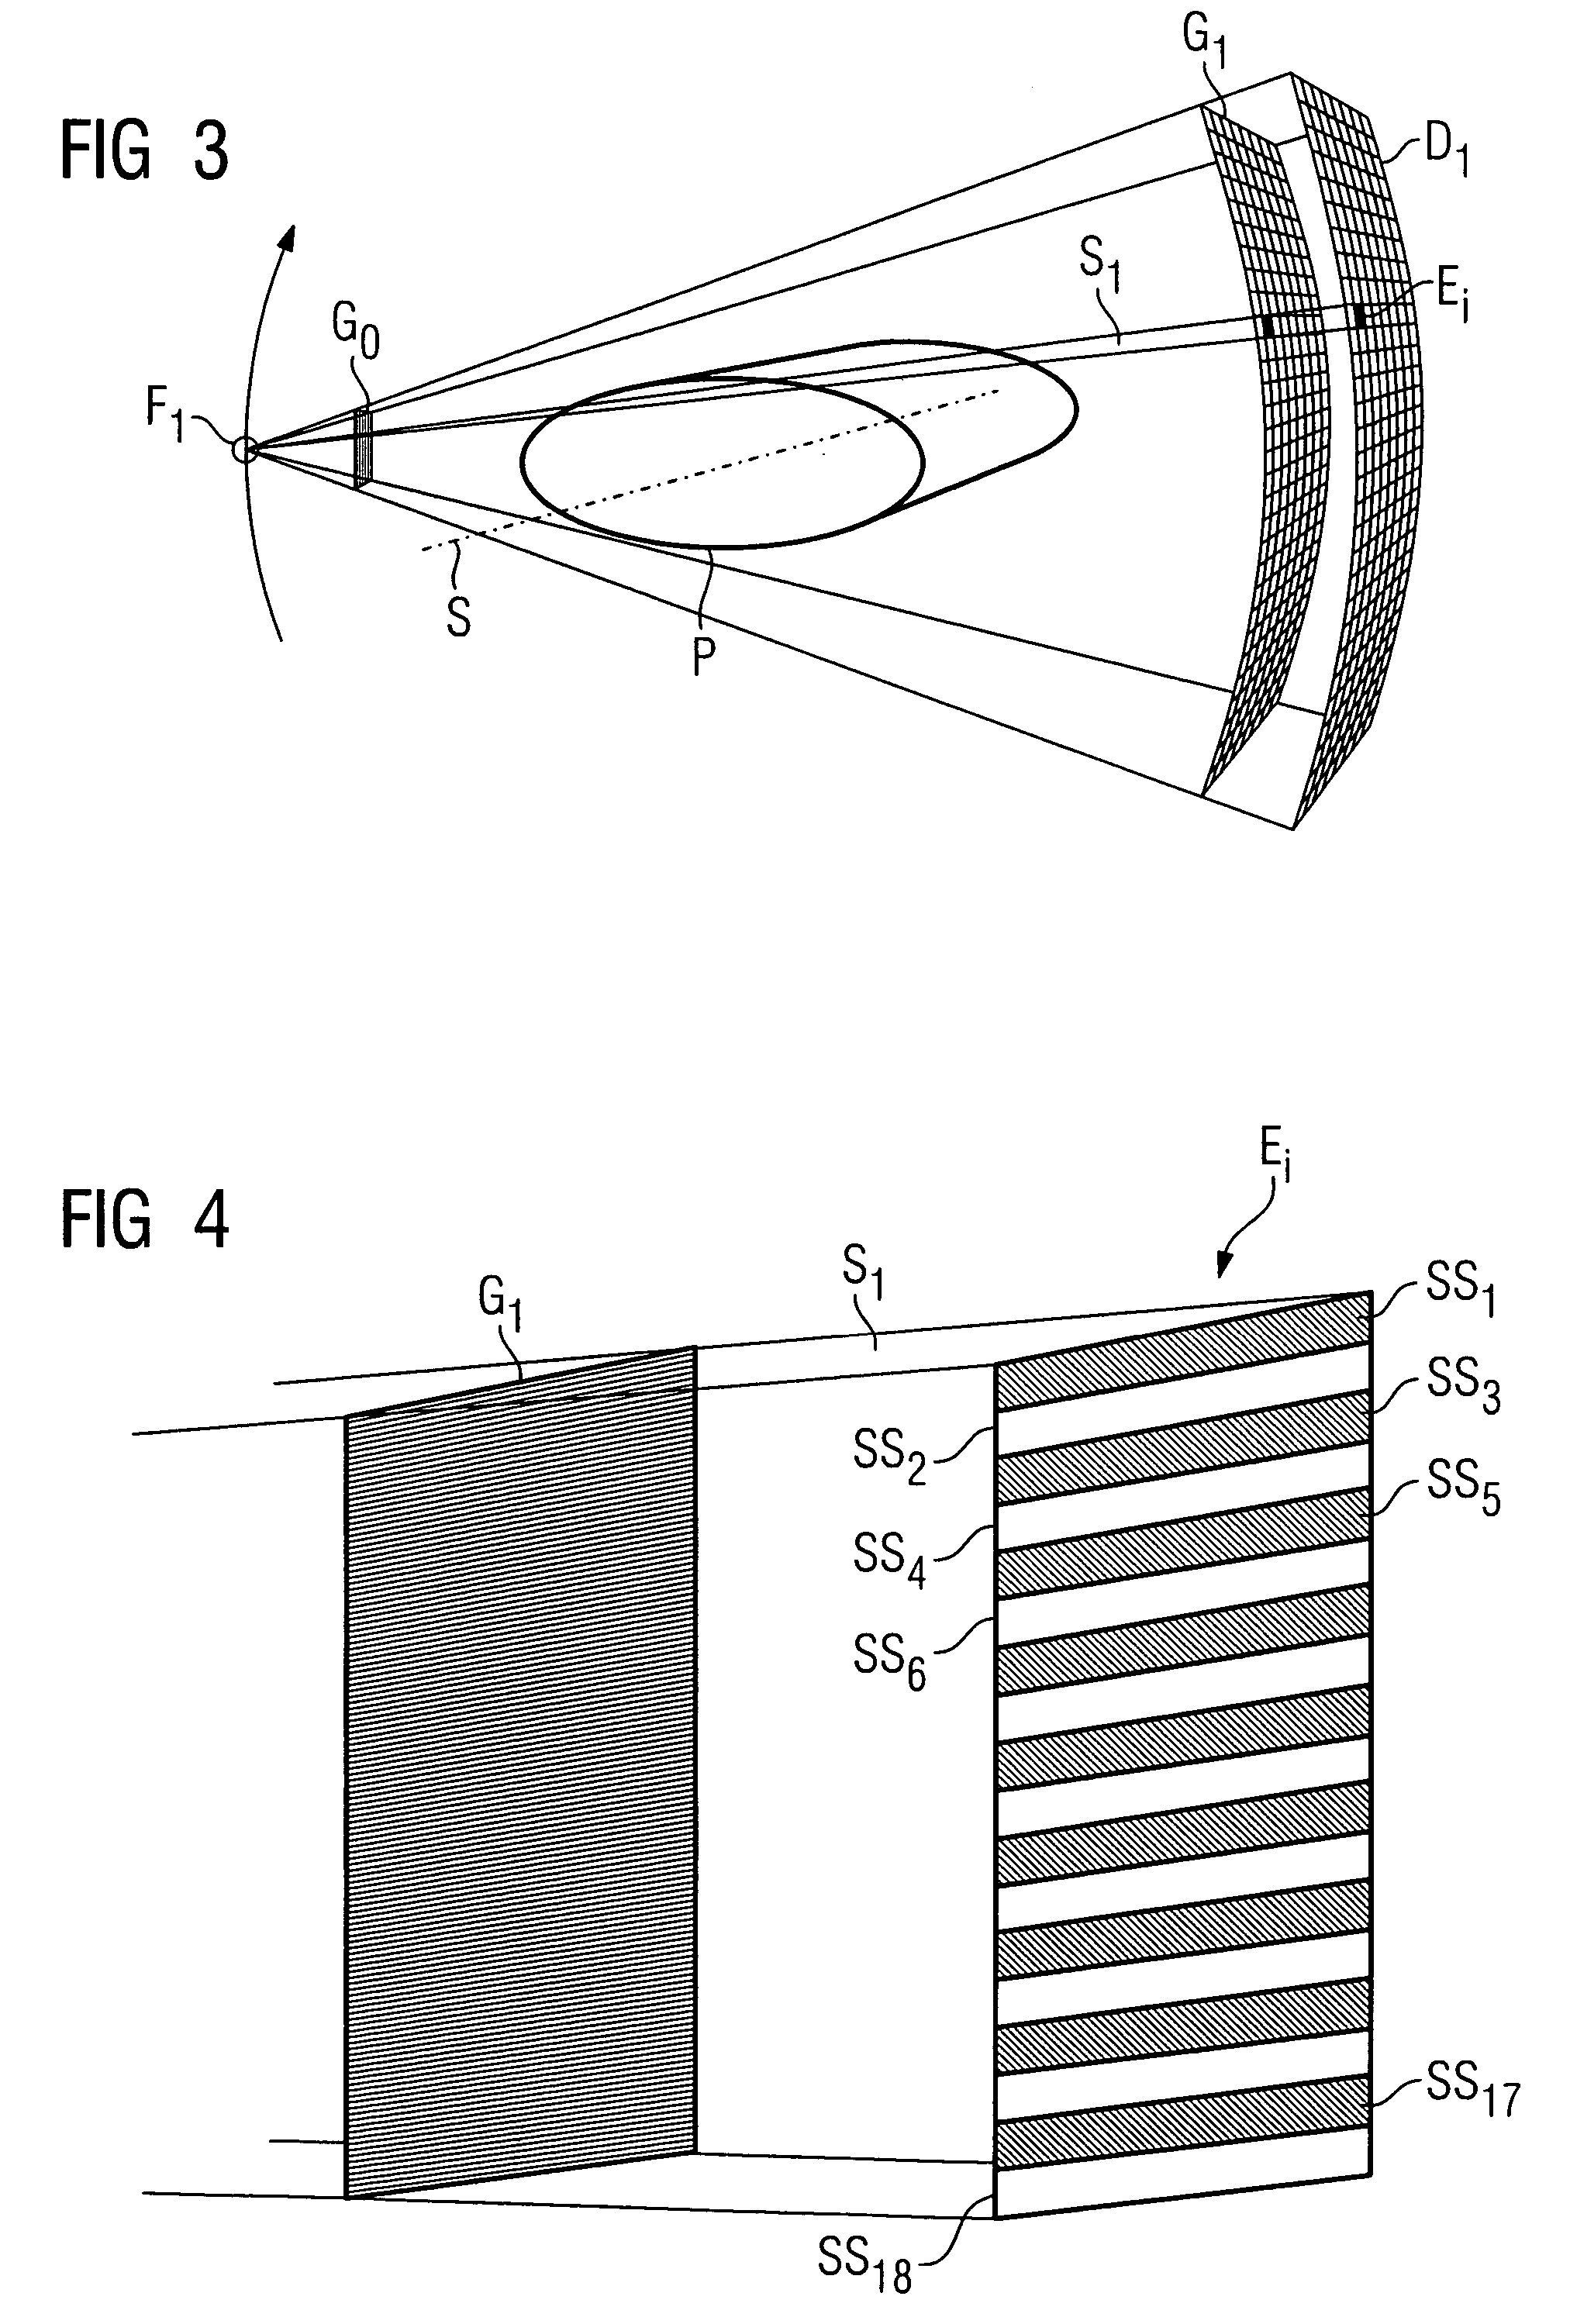 Focus/detector system of an x-ray apparatus for generating phase contrast recordings